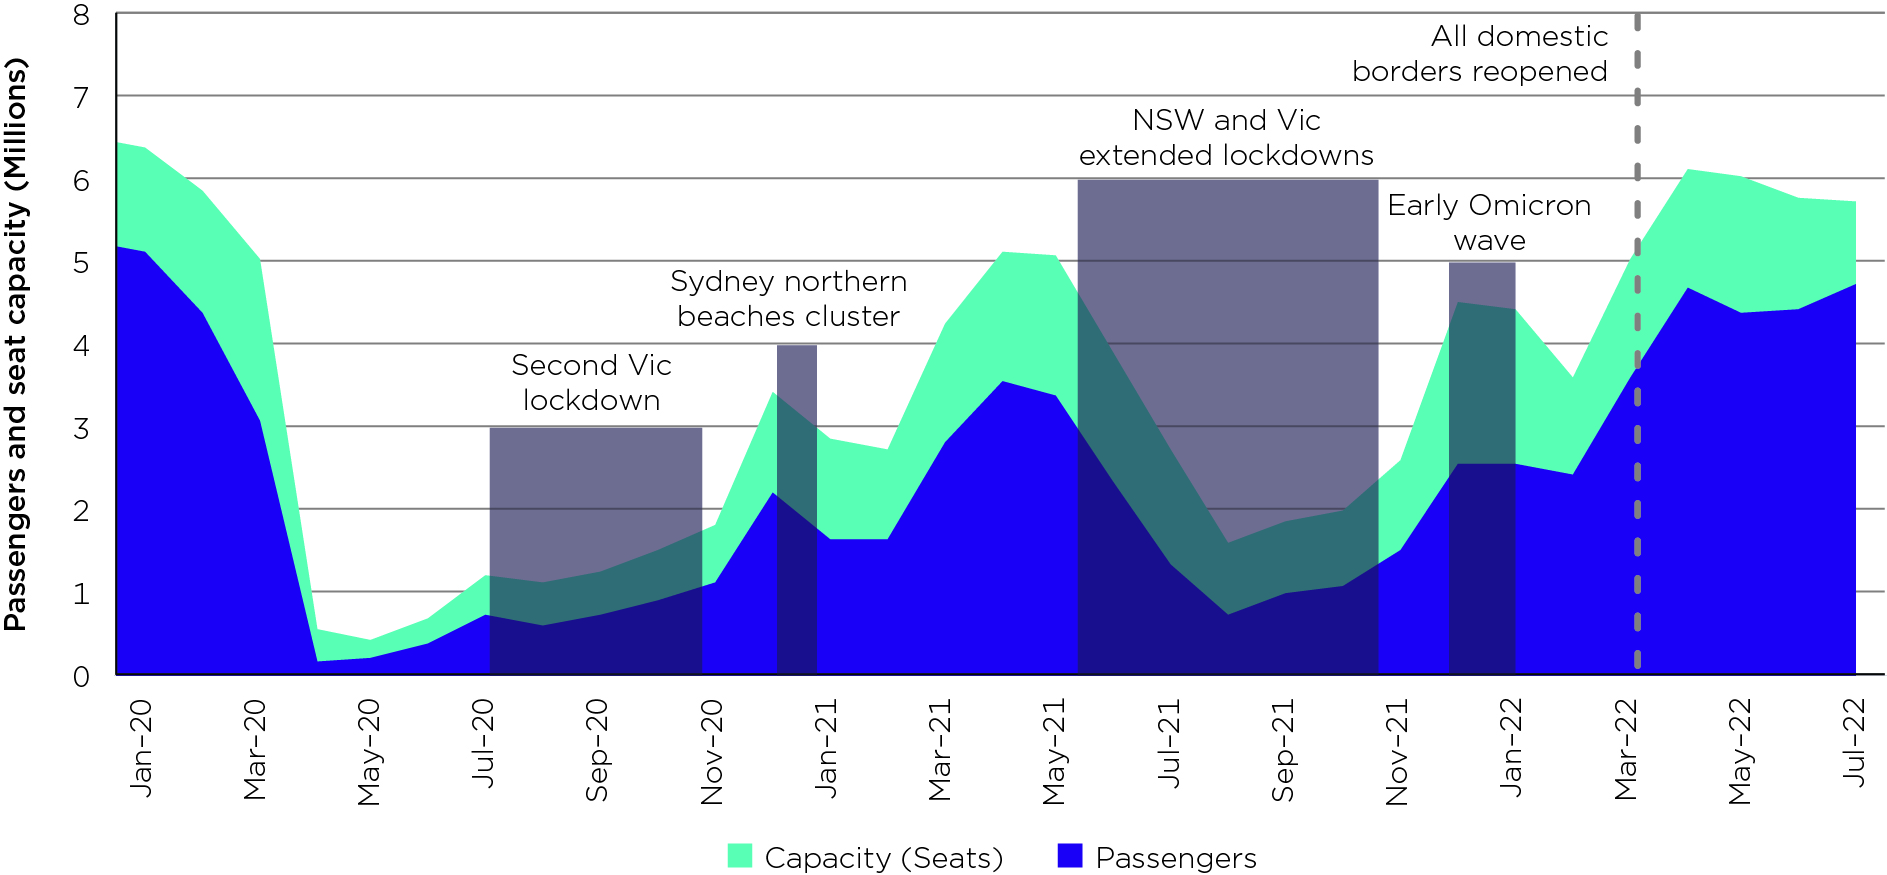 Passenger numbers on Australian domestic flights almost returned to pre-pandemic levels of flying in July 2022